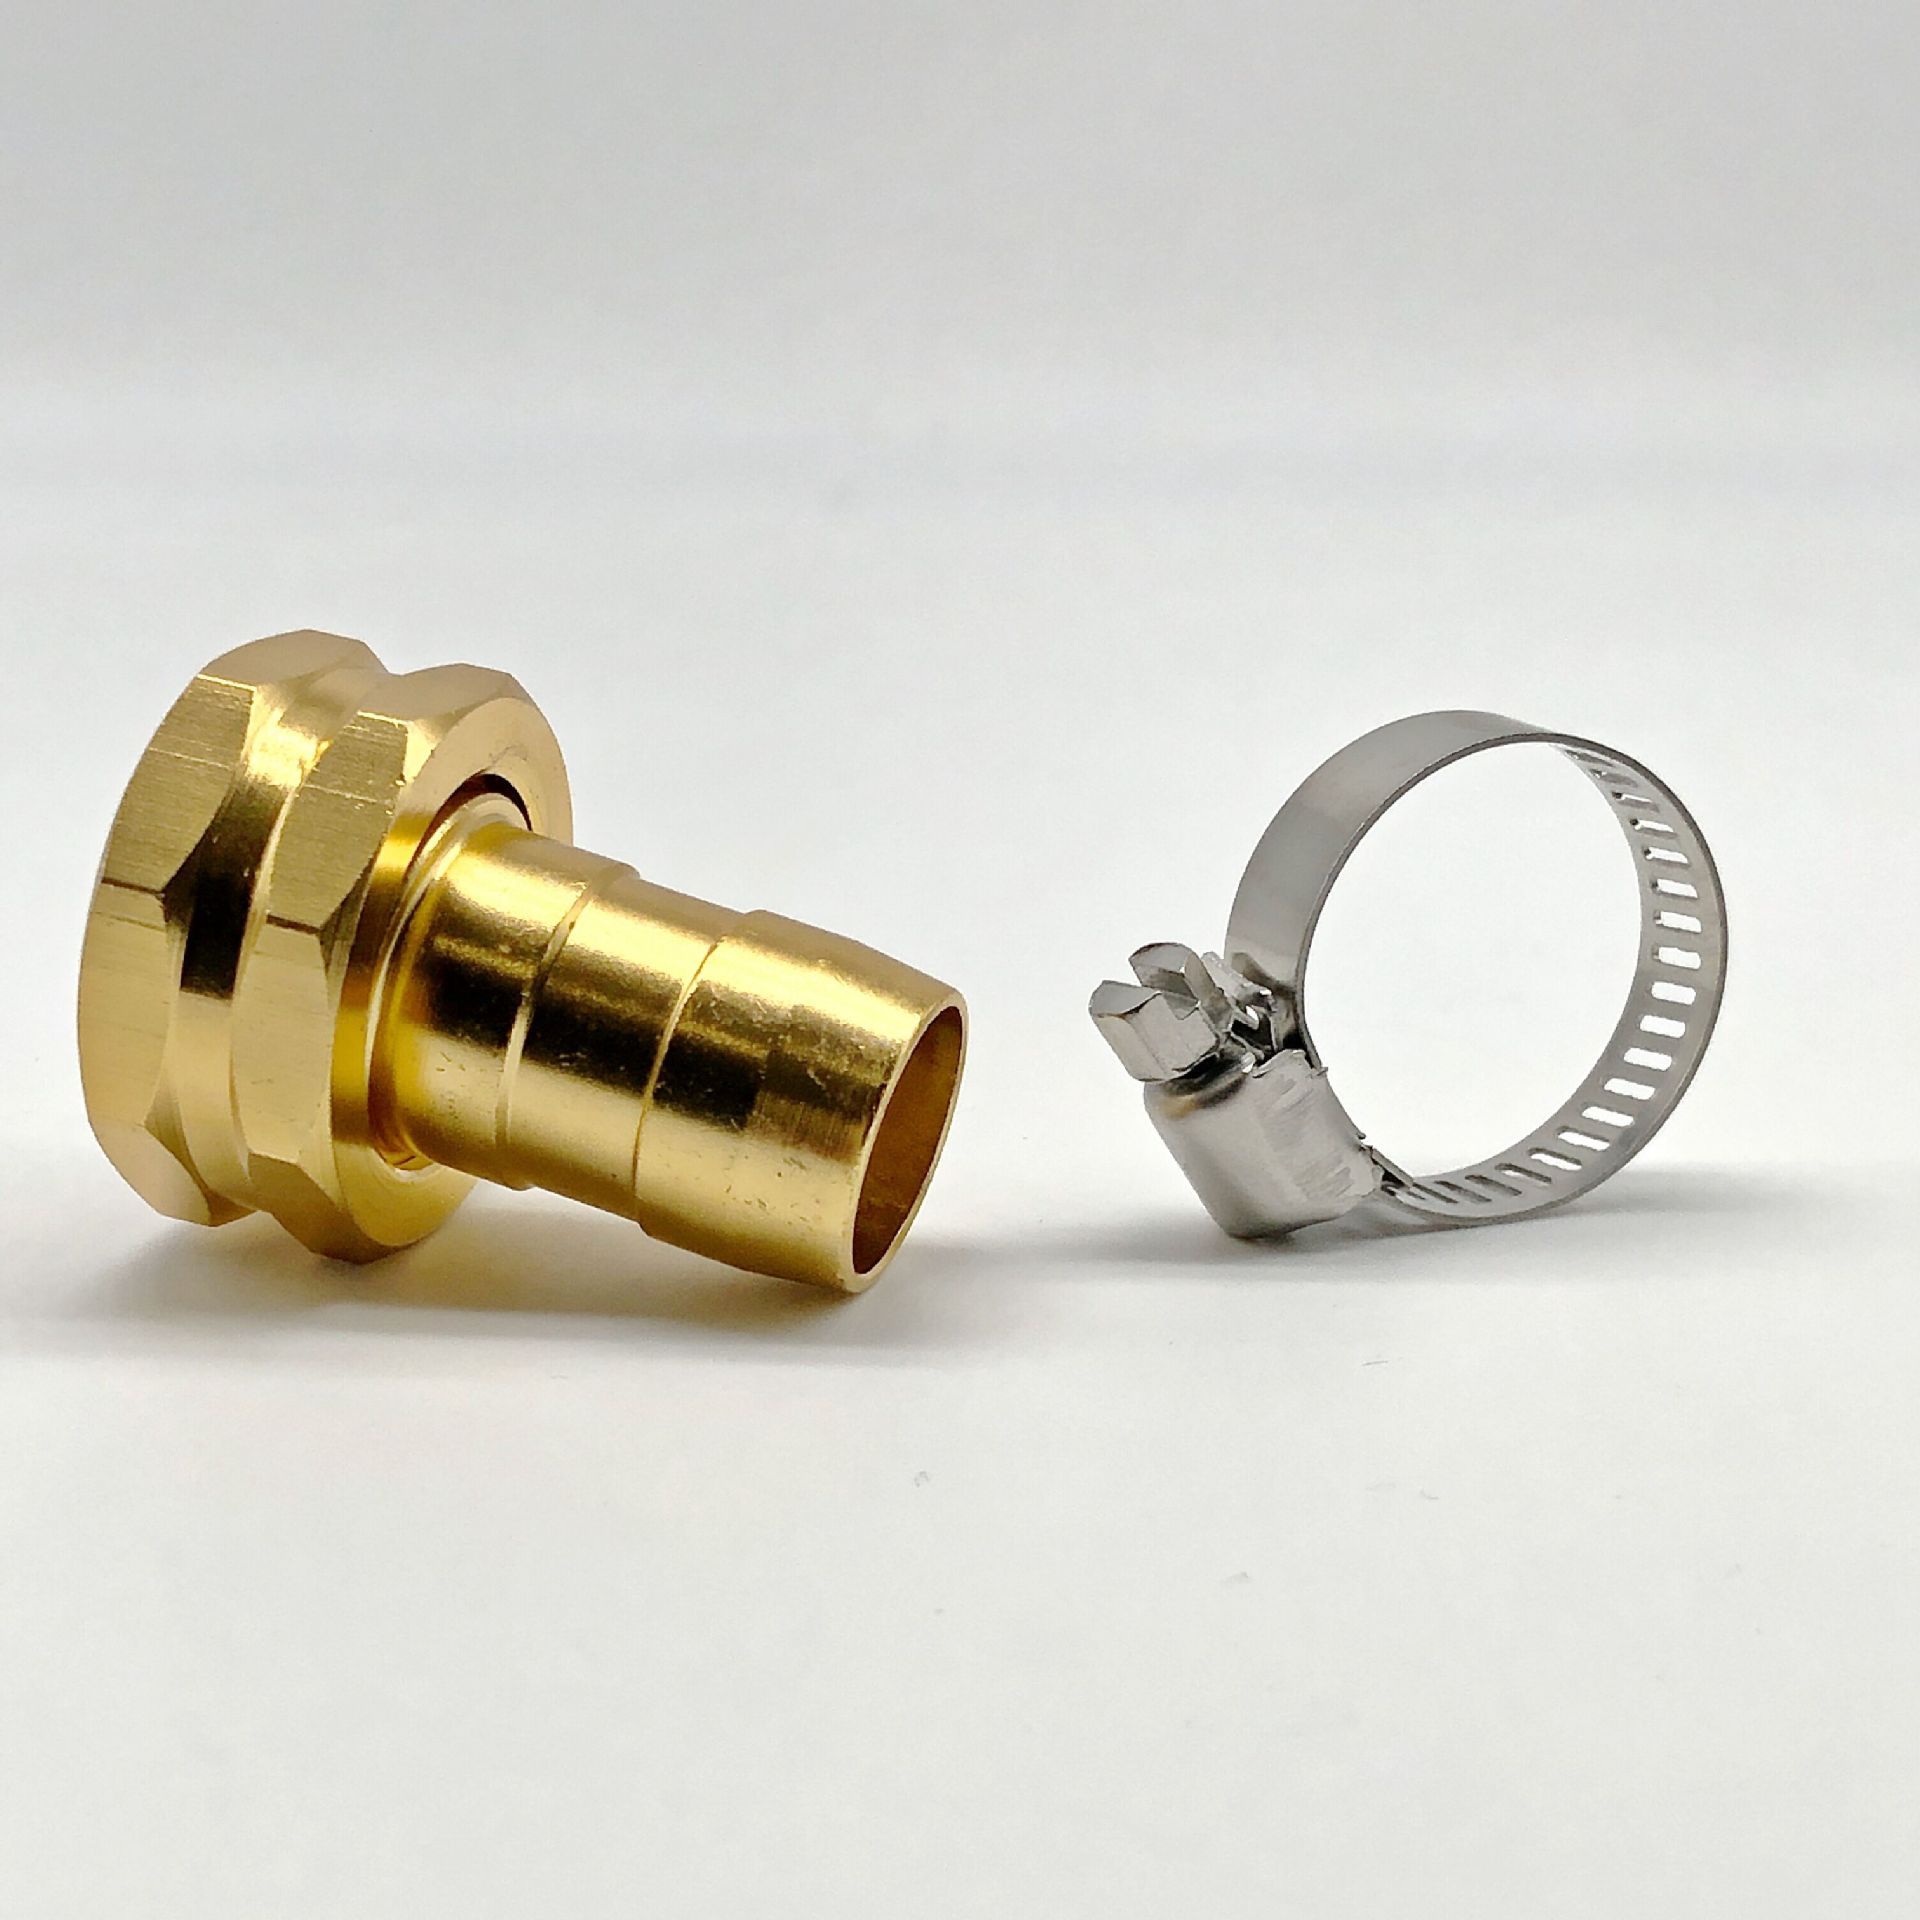 1-Set-Garden-Hose-Repair-Connector-With-Clamps-Fit-For-34quot-Or-58quot-Garden-Hose-Fitting-1743025